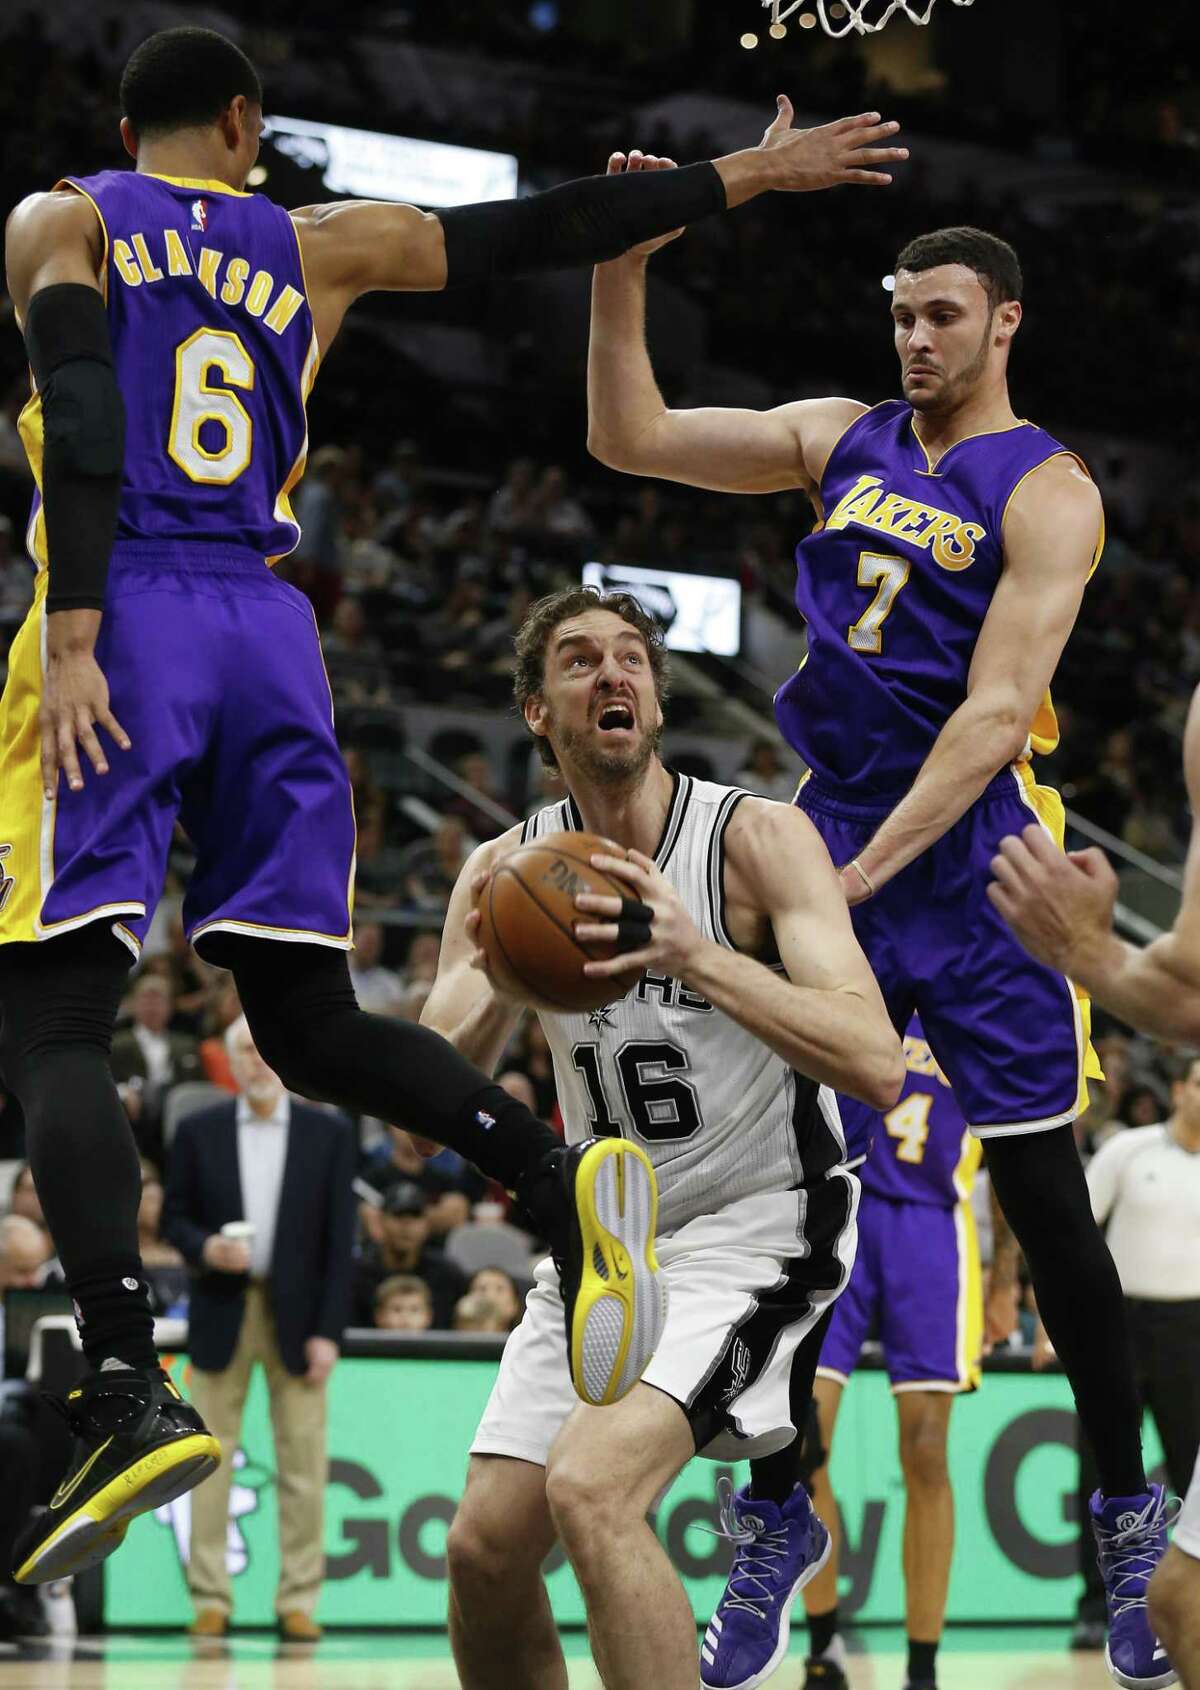 Spurs' Pau Gasol (16) attempts a score under the basket against Los Angeles Lakers' Jordan Clarkson (06) and Larry Nance, Jr. (07) during their game at the AT&T Center on Wednesday, Apr. 5, 2017. (Kin Man Hui/San Antonio Express-News)